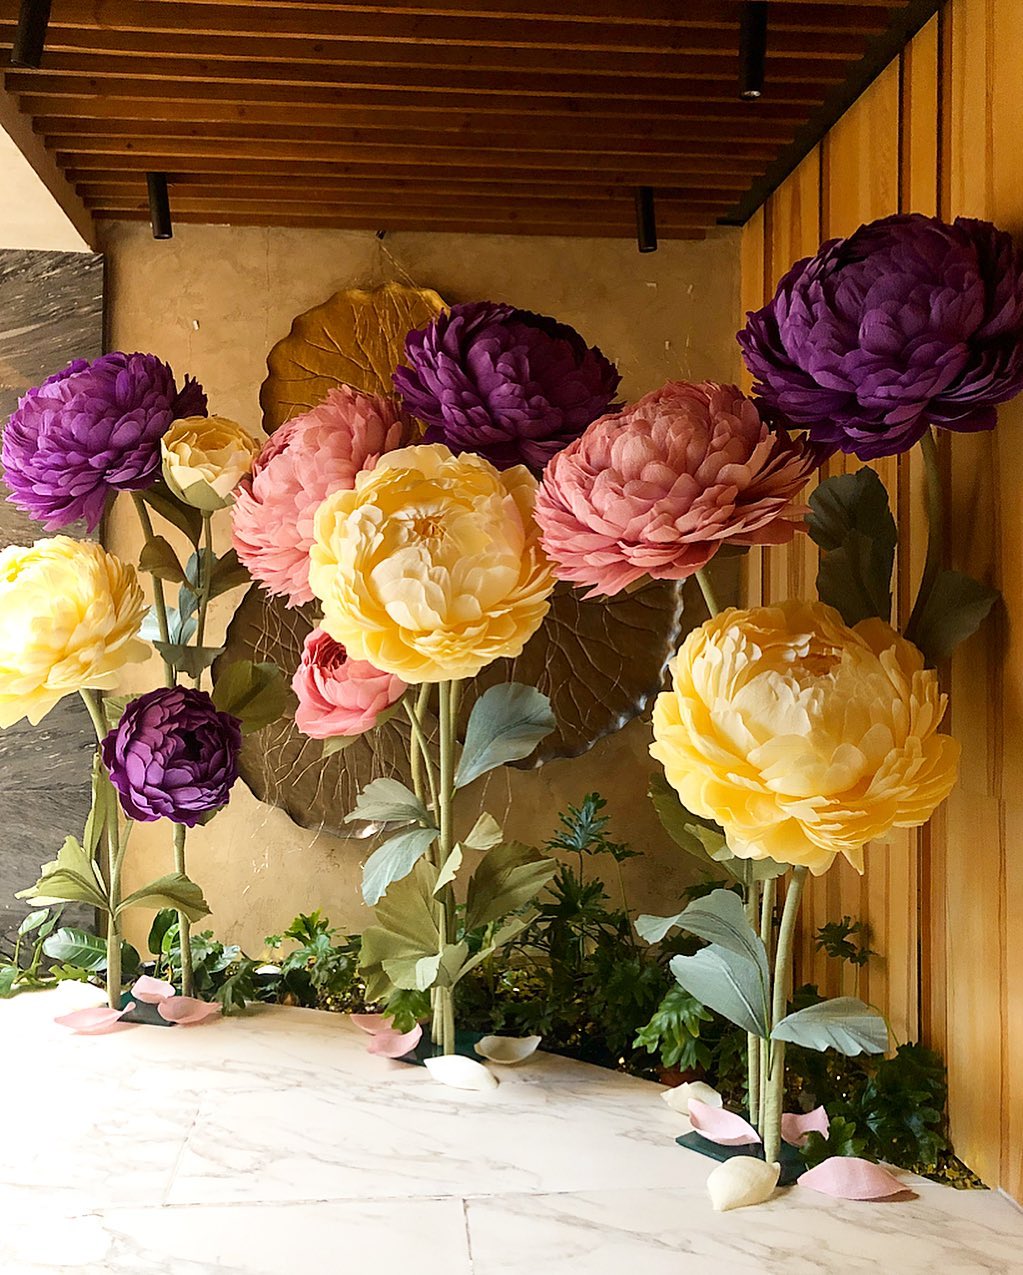 Large Paper Flowers 